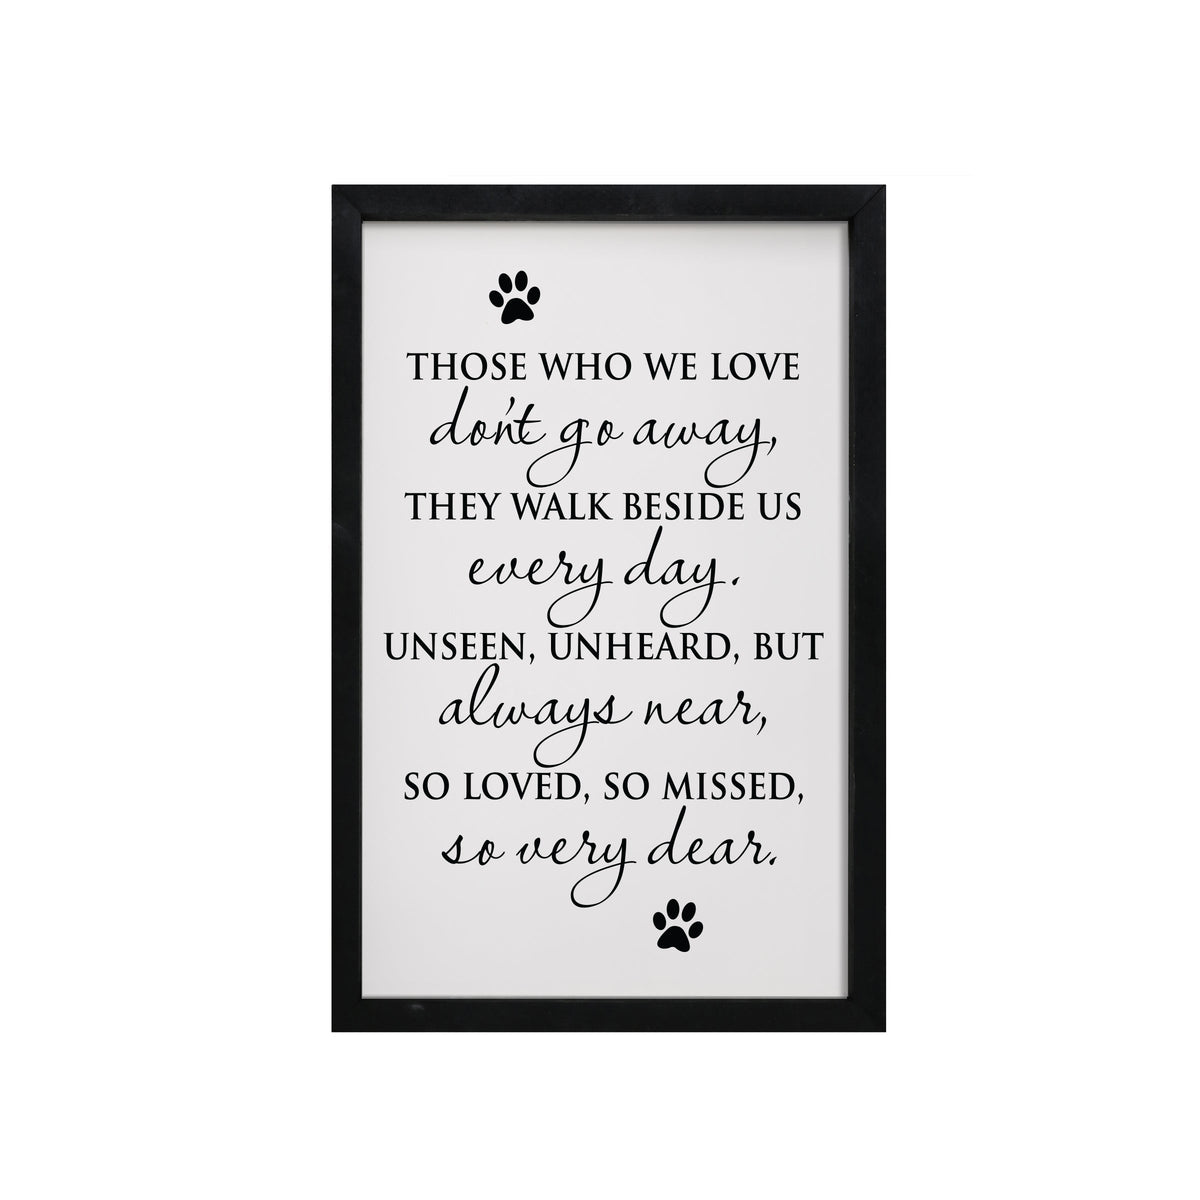 10x7 Black Framed Pet Memorial Shadow Box with phrase &quot;Those Who We Love Don&#39;t Go Away&quot;